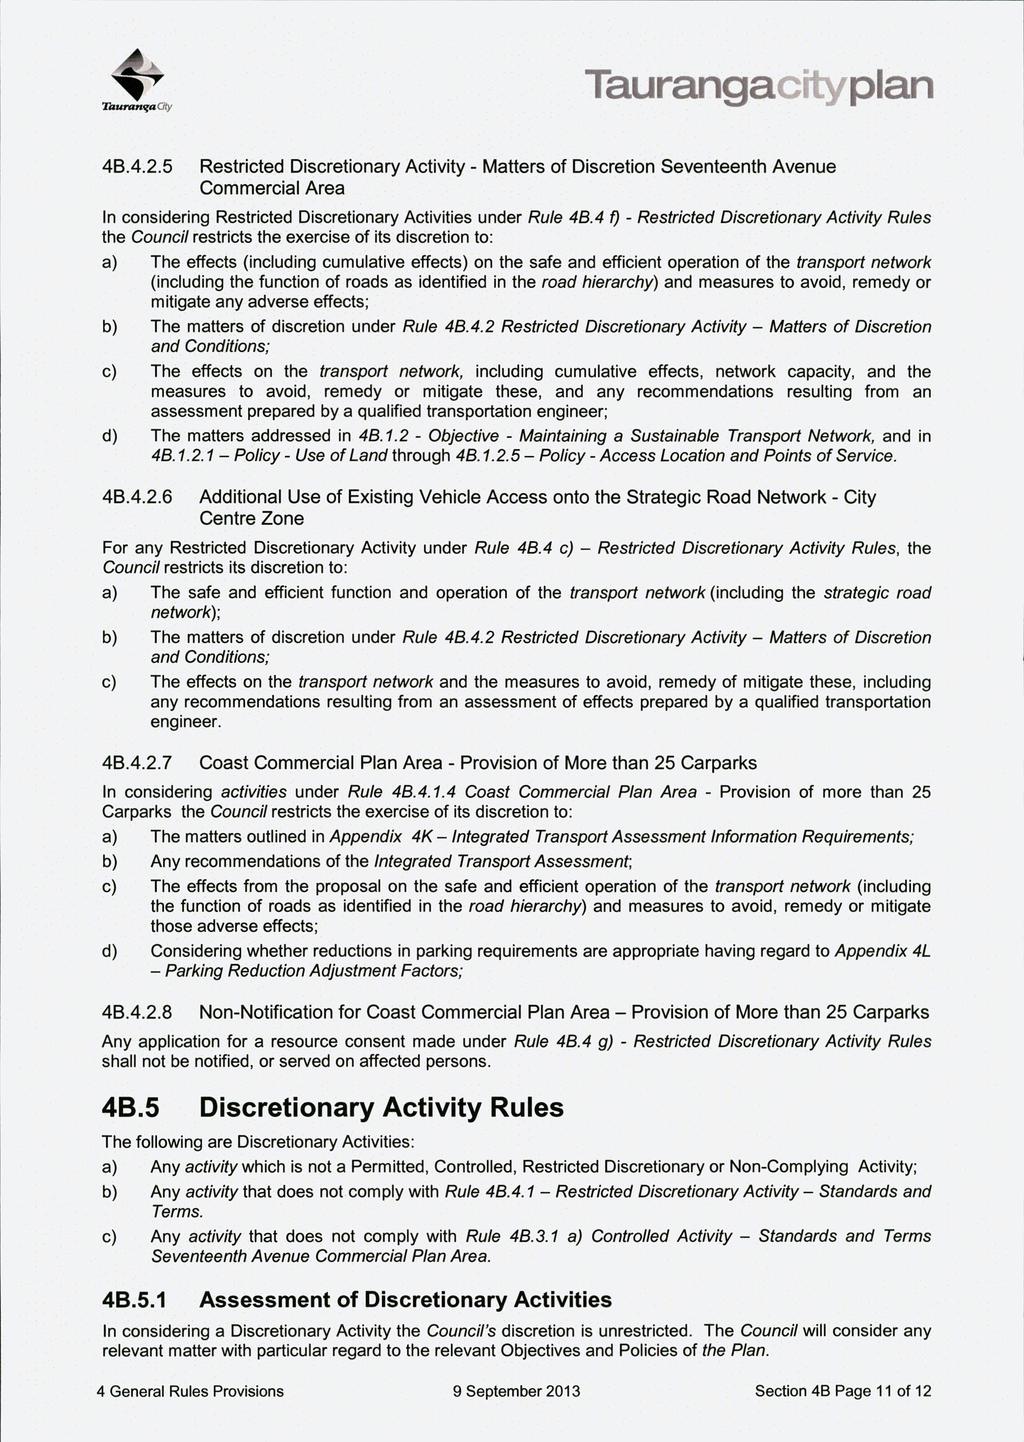 TauranifaOty 48.4.2.5 Restricted Discretionary Activity - Matters of Discretion Seventeenth Avenue Commercial Area In considering Restricted Discretionary Activities under Rule 46.